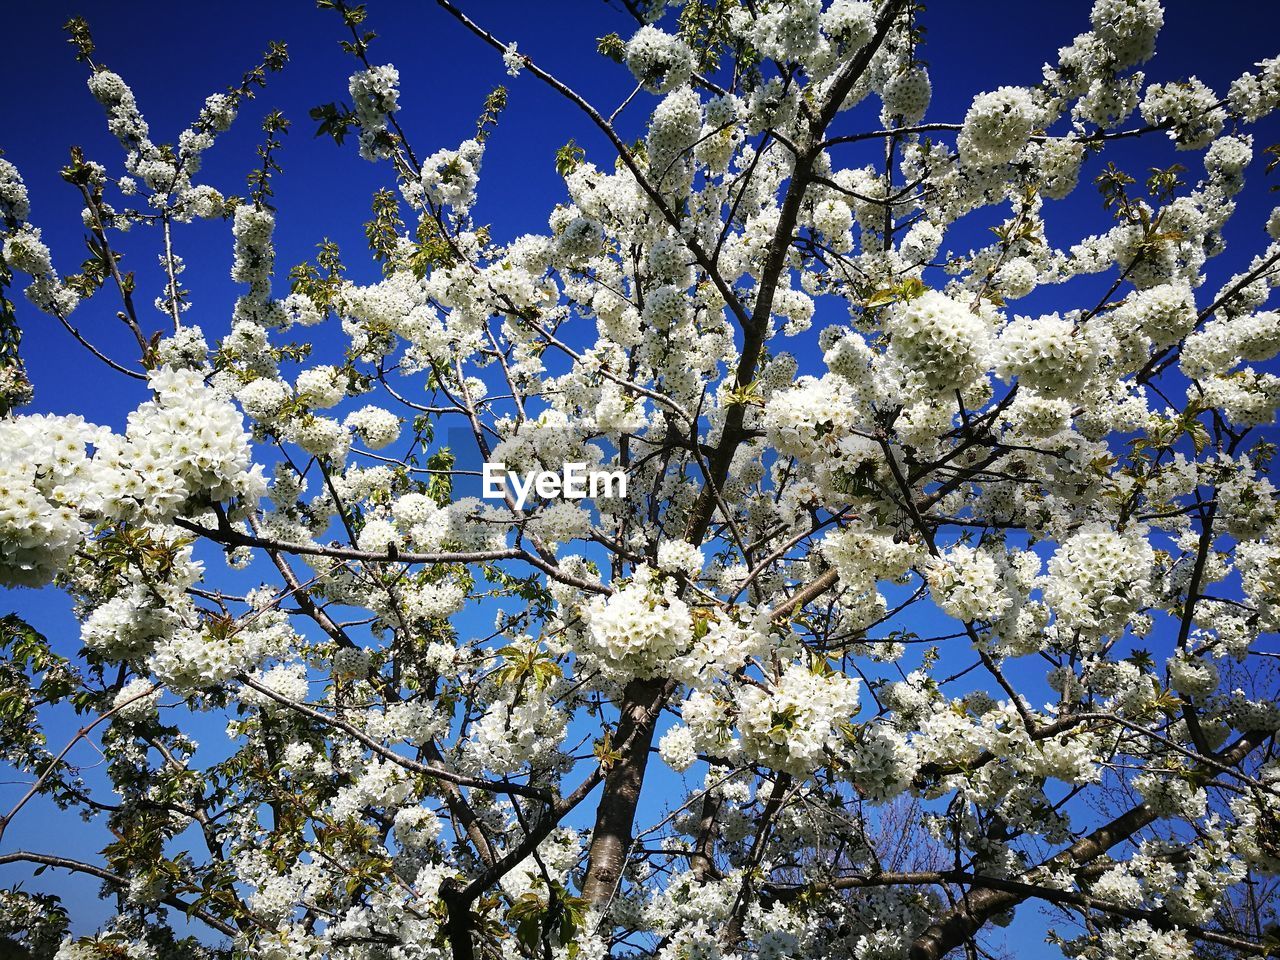 LOW ANGLE VIEW OF APPLE BLOSSOMS IN SPRING AGAINST BLUE SKY